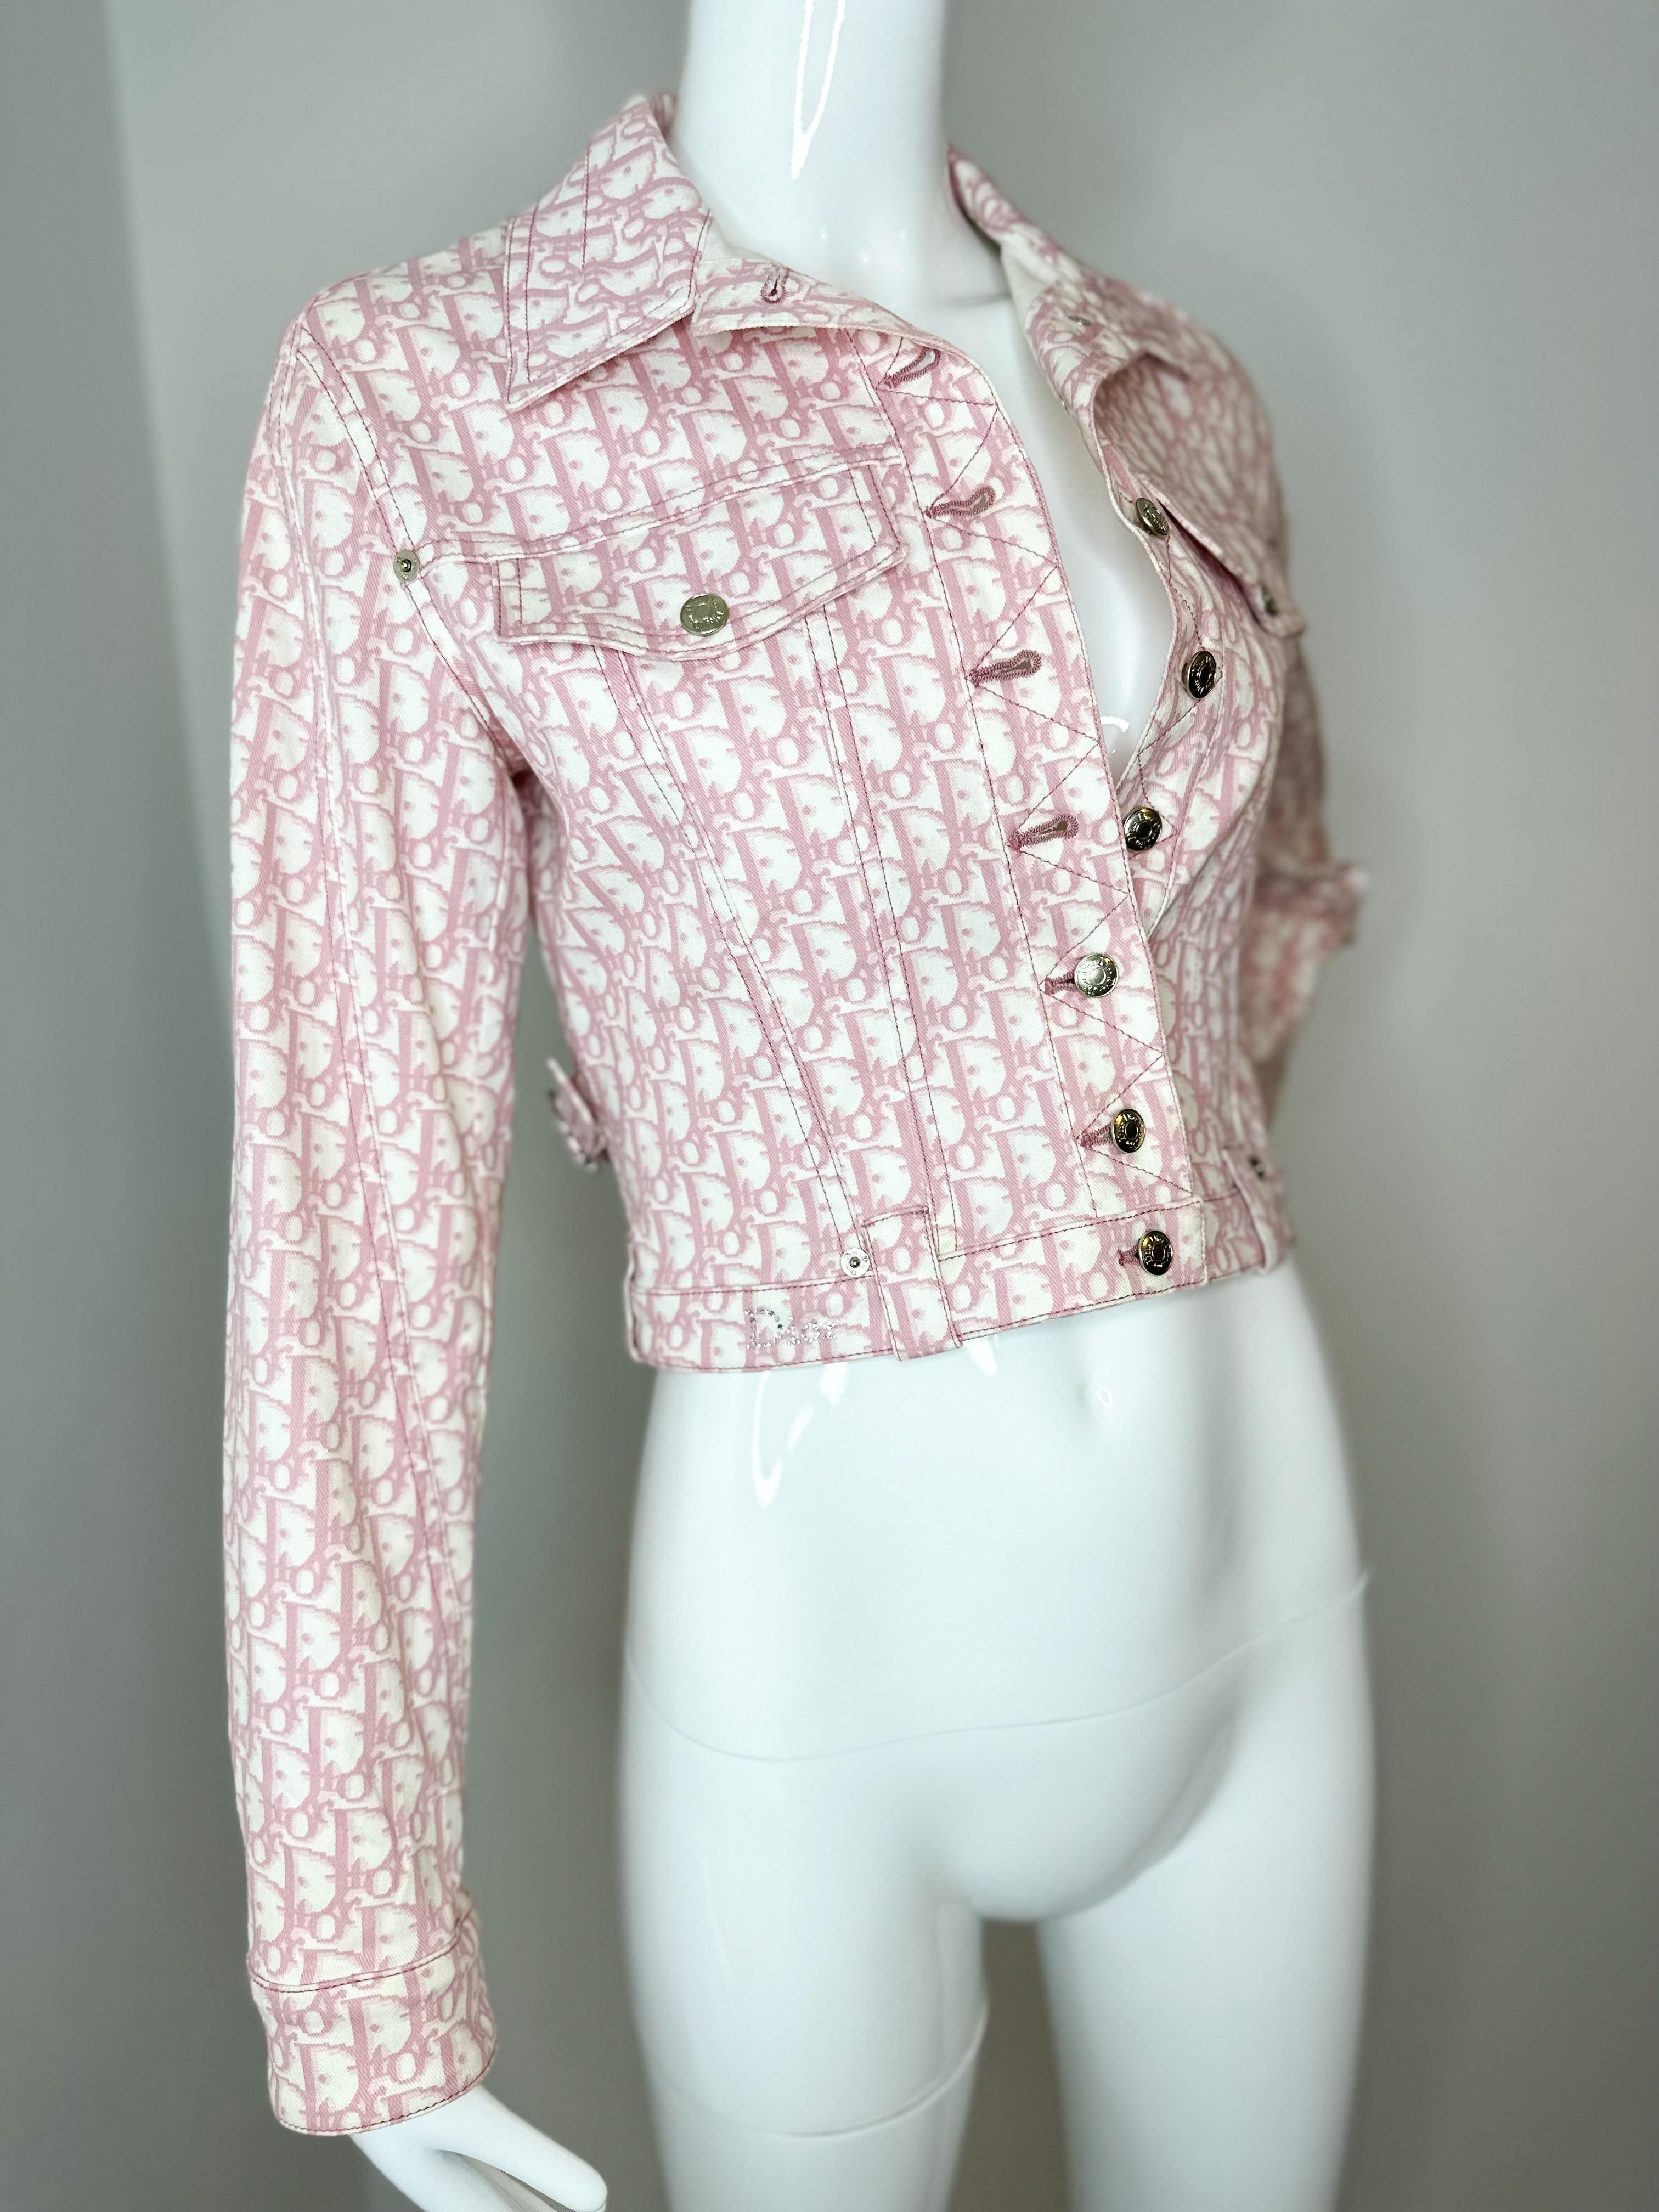 Christian Dior  by John Galliano 2004 Girly Collection pink and white monogram jacket  jacket 

Size Fr 36
US 4

Excellent condition, no rips, stains or odors. Even though it’s a vintage it was worn once and remained in excellent condition 
